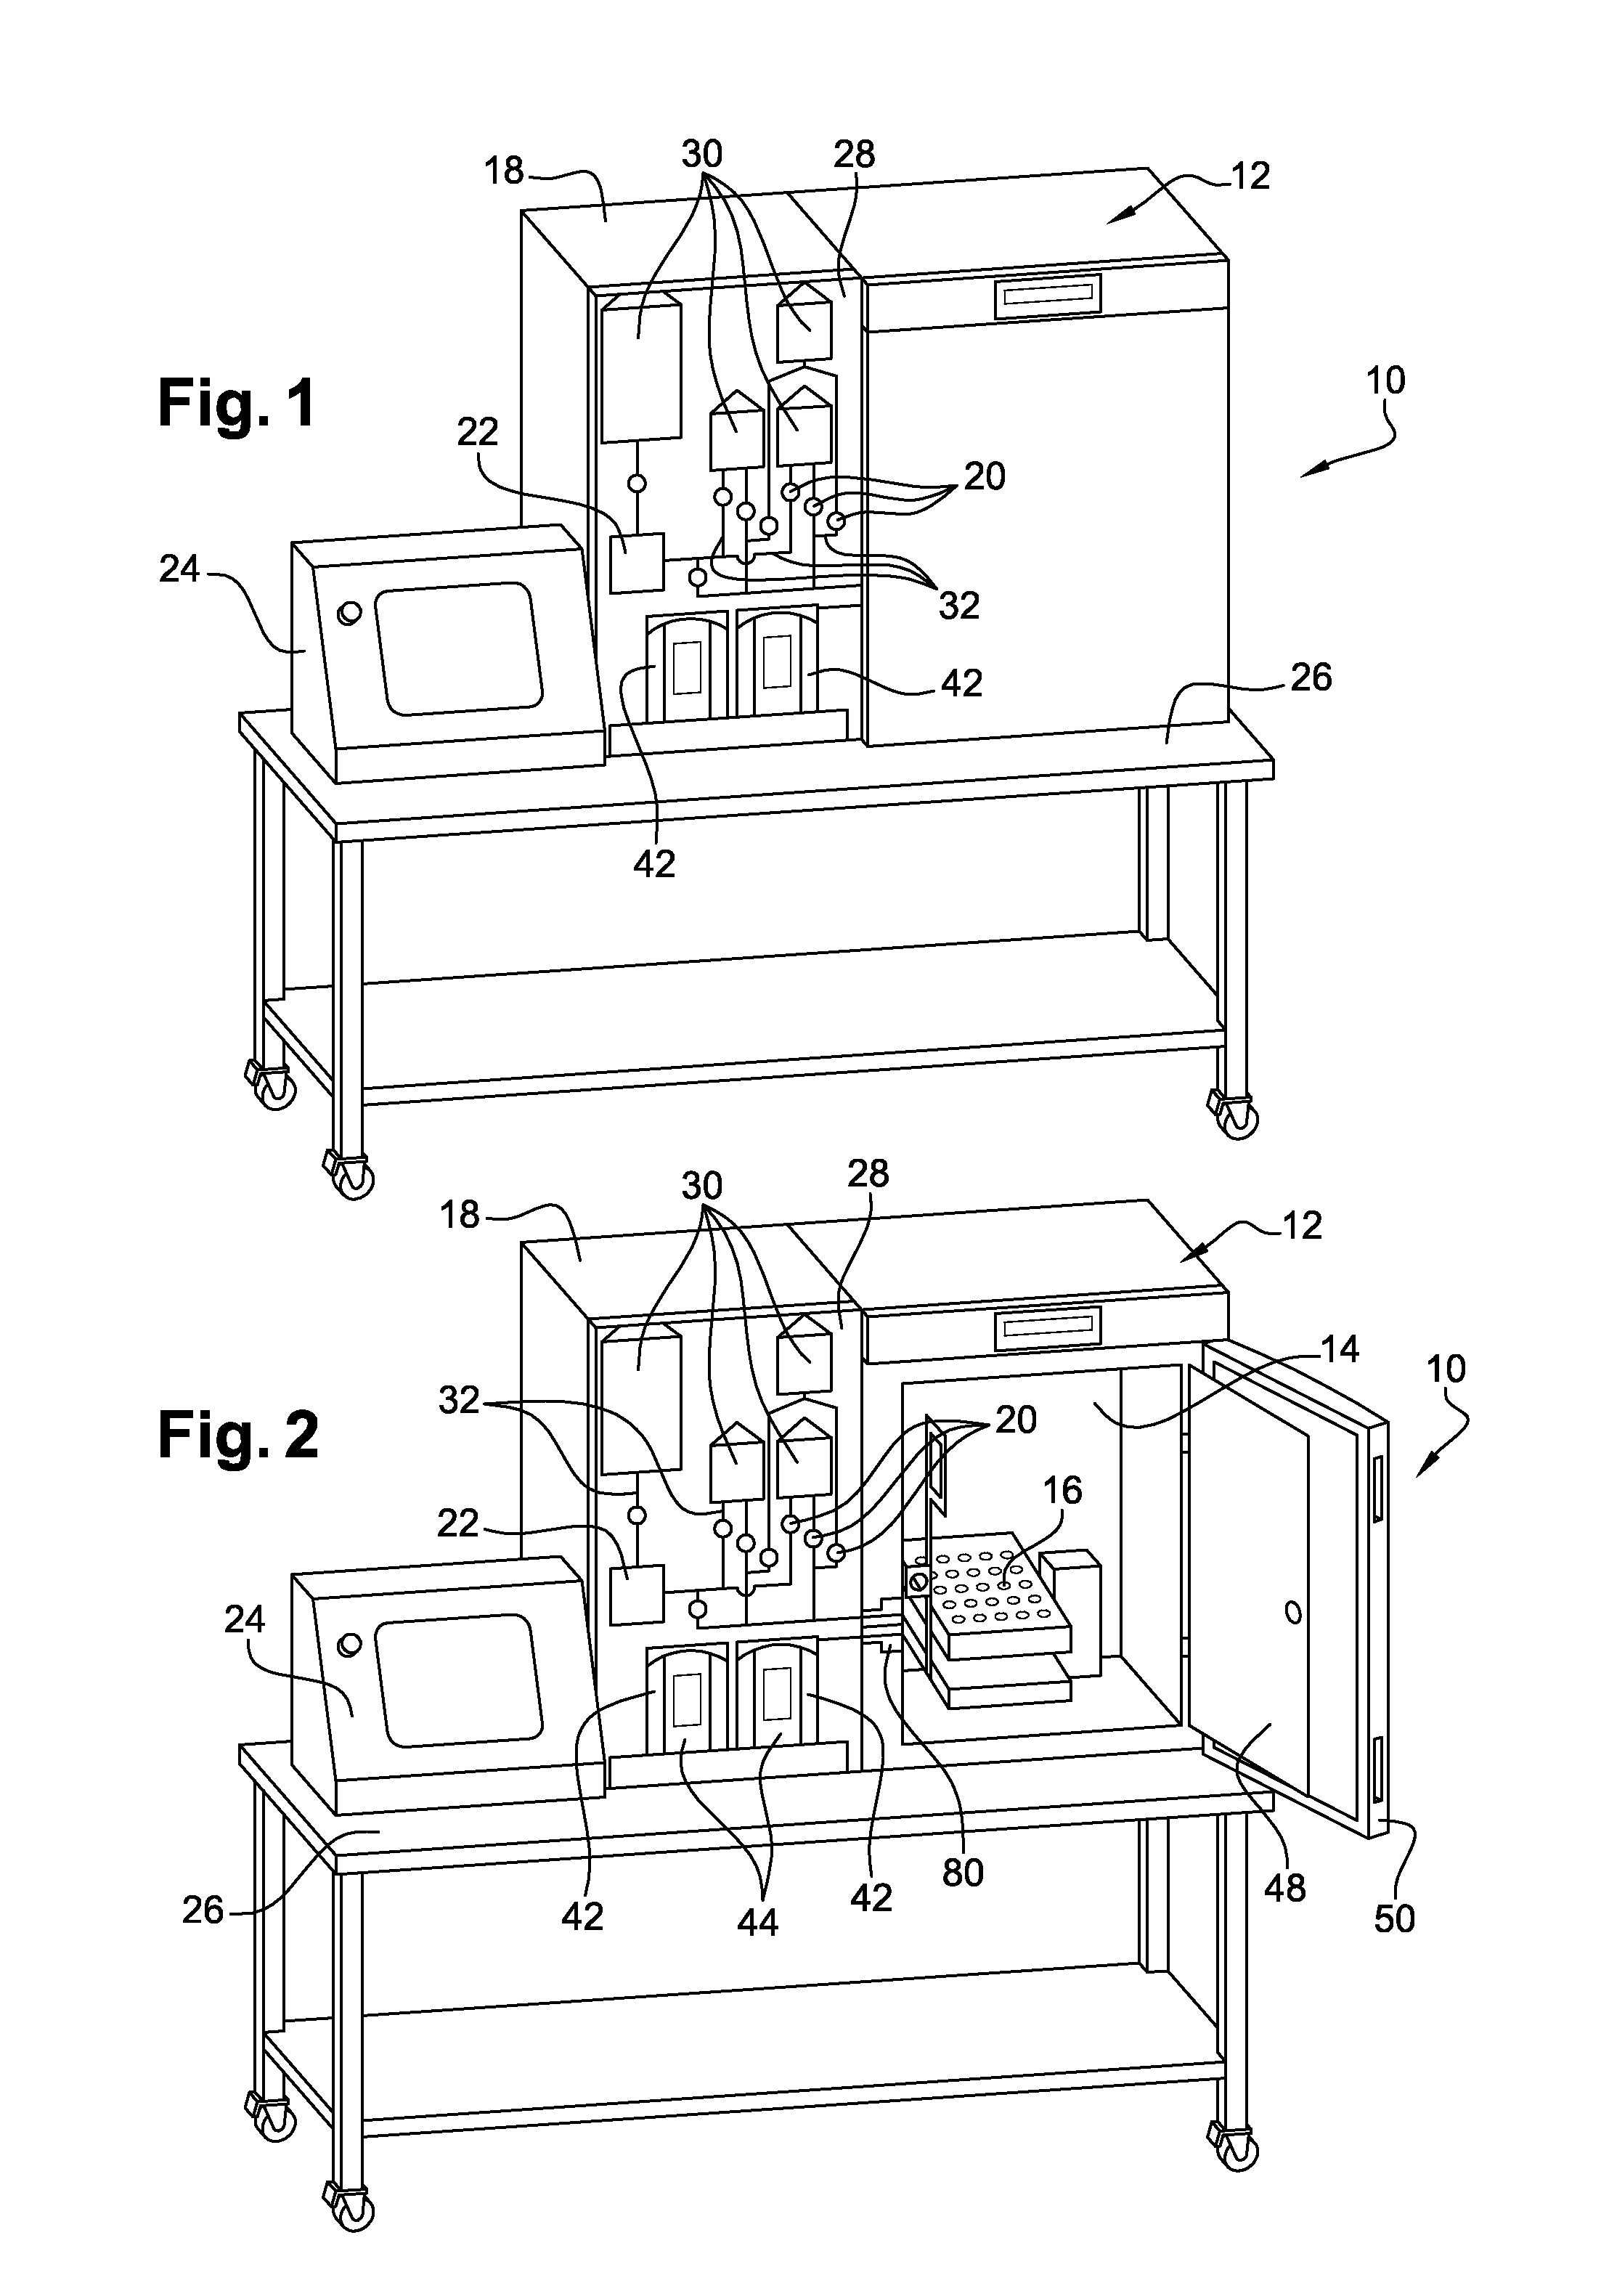 Automated apparatus and method of cell culture